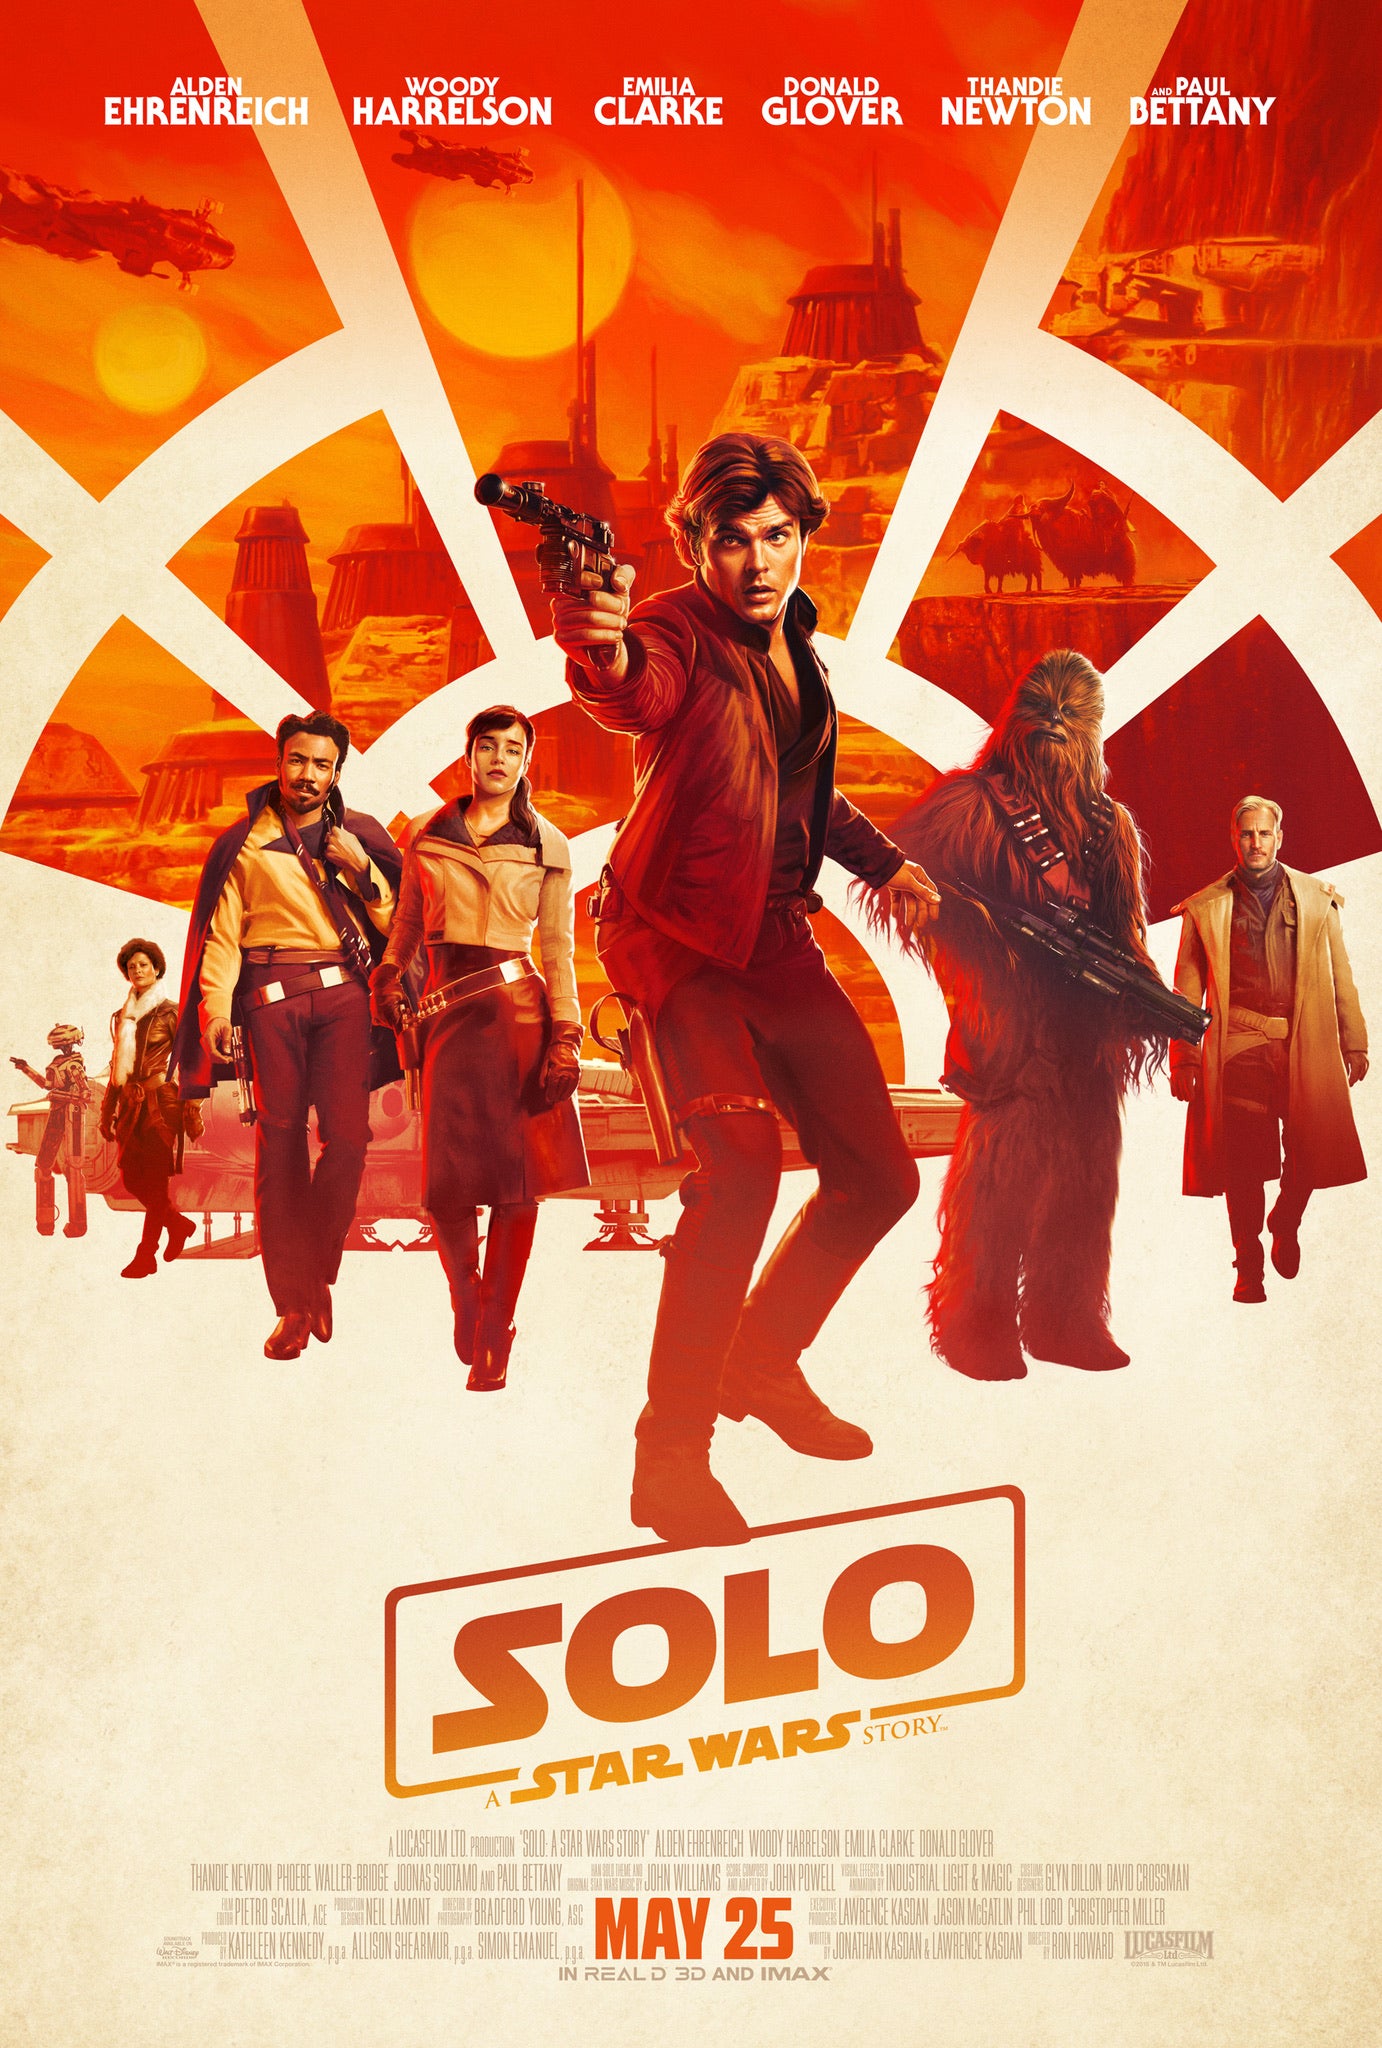 Solo: A Star Wars Story (2018) Vudu or Movies Anywhere HD redemption only